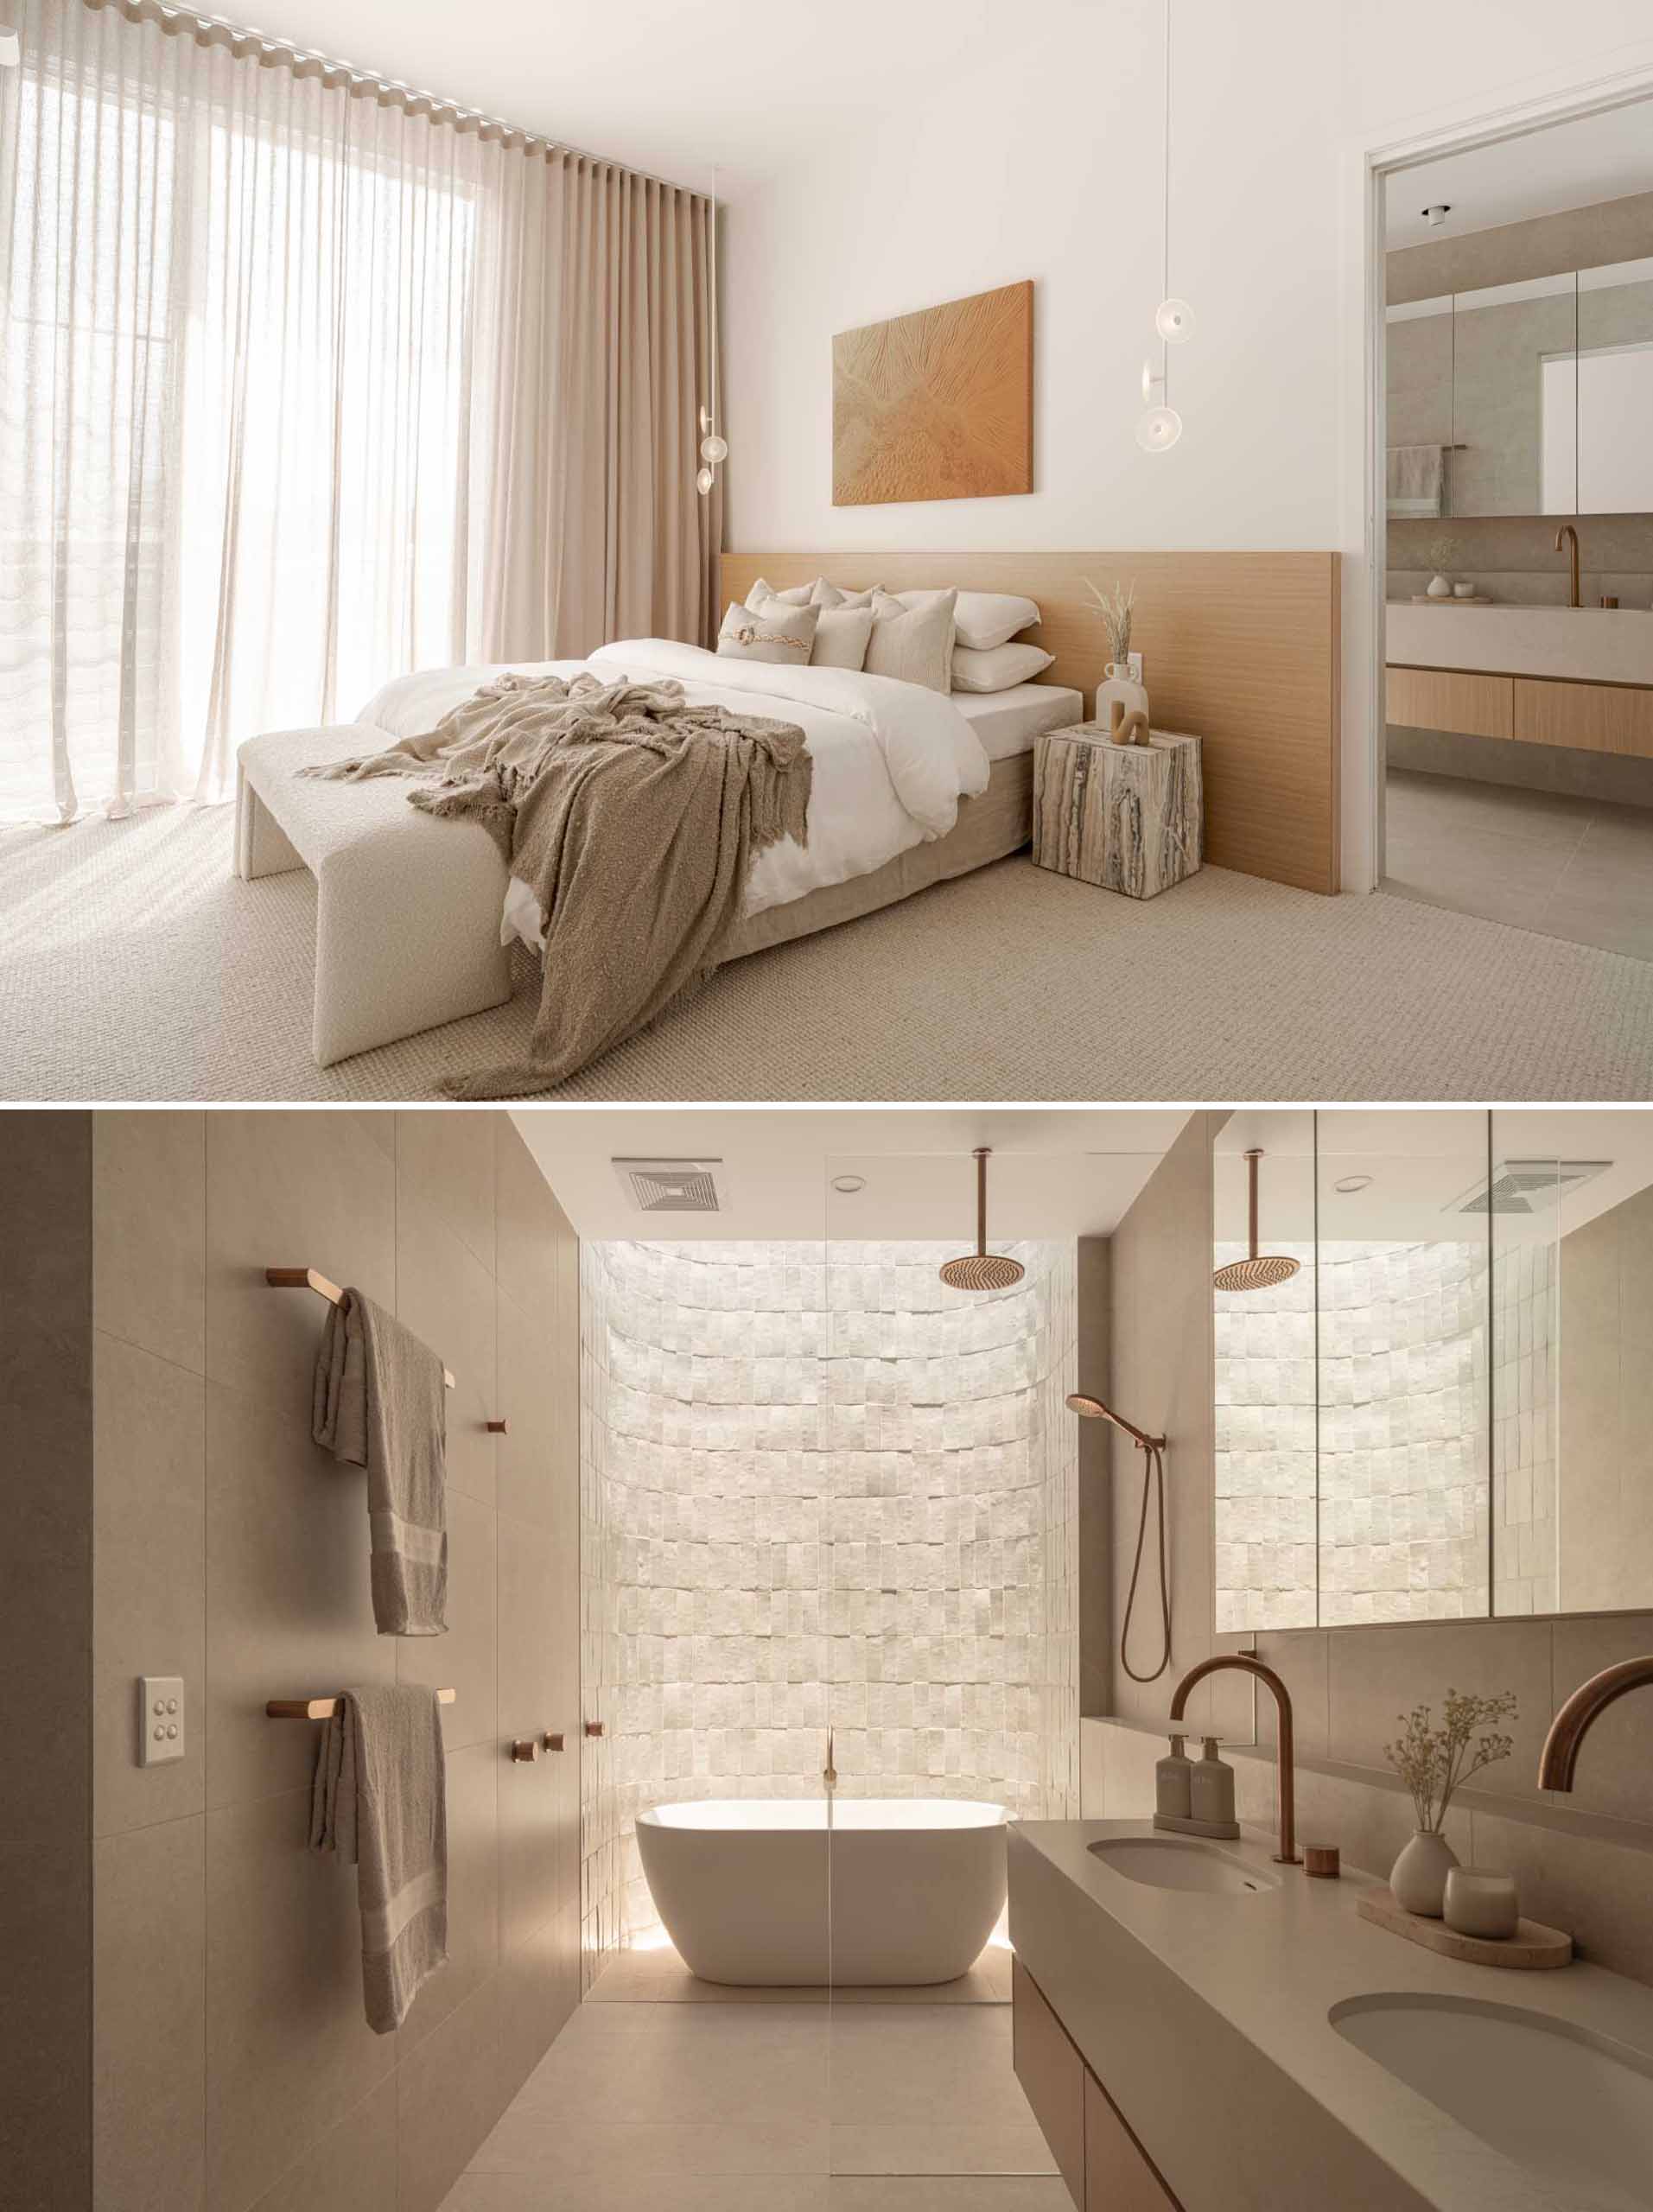 This contemporary primary bedroom features a wood headboard, while in the ensuite bathroom, sunlight cascades through the sky window, illuminating the uneven textures of the handmade Moroccan bejmat tiles, often evoking strong emotional reactions amongst visitors.